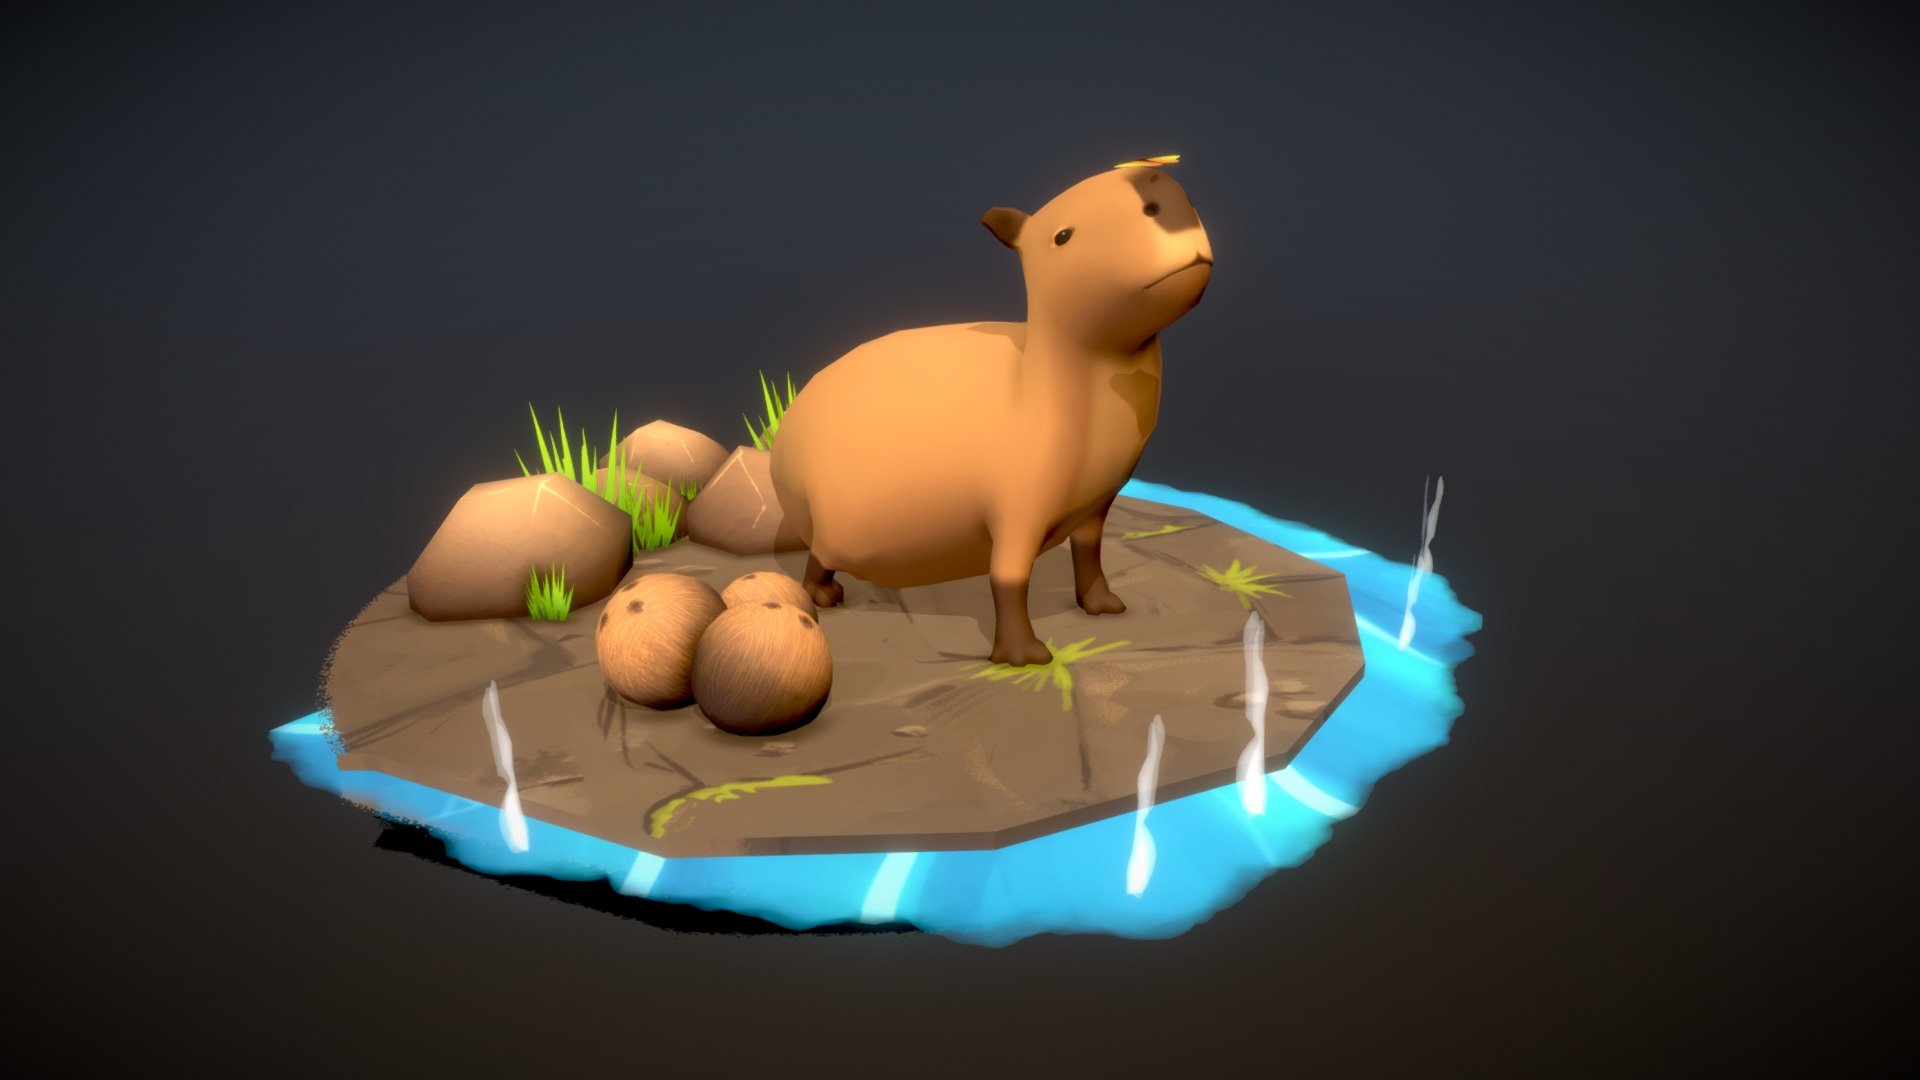 Capybara model with simple rig and animation.
Model in Blender, Texture in Substance Painter and Photoshop 3d model